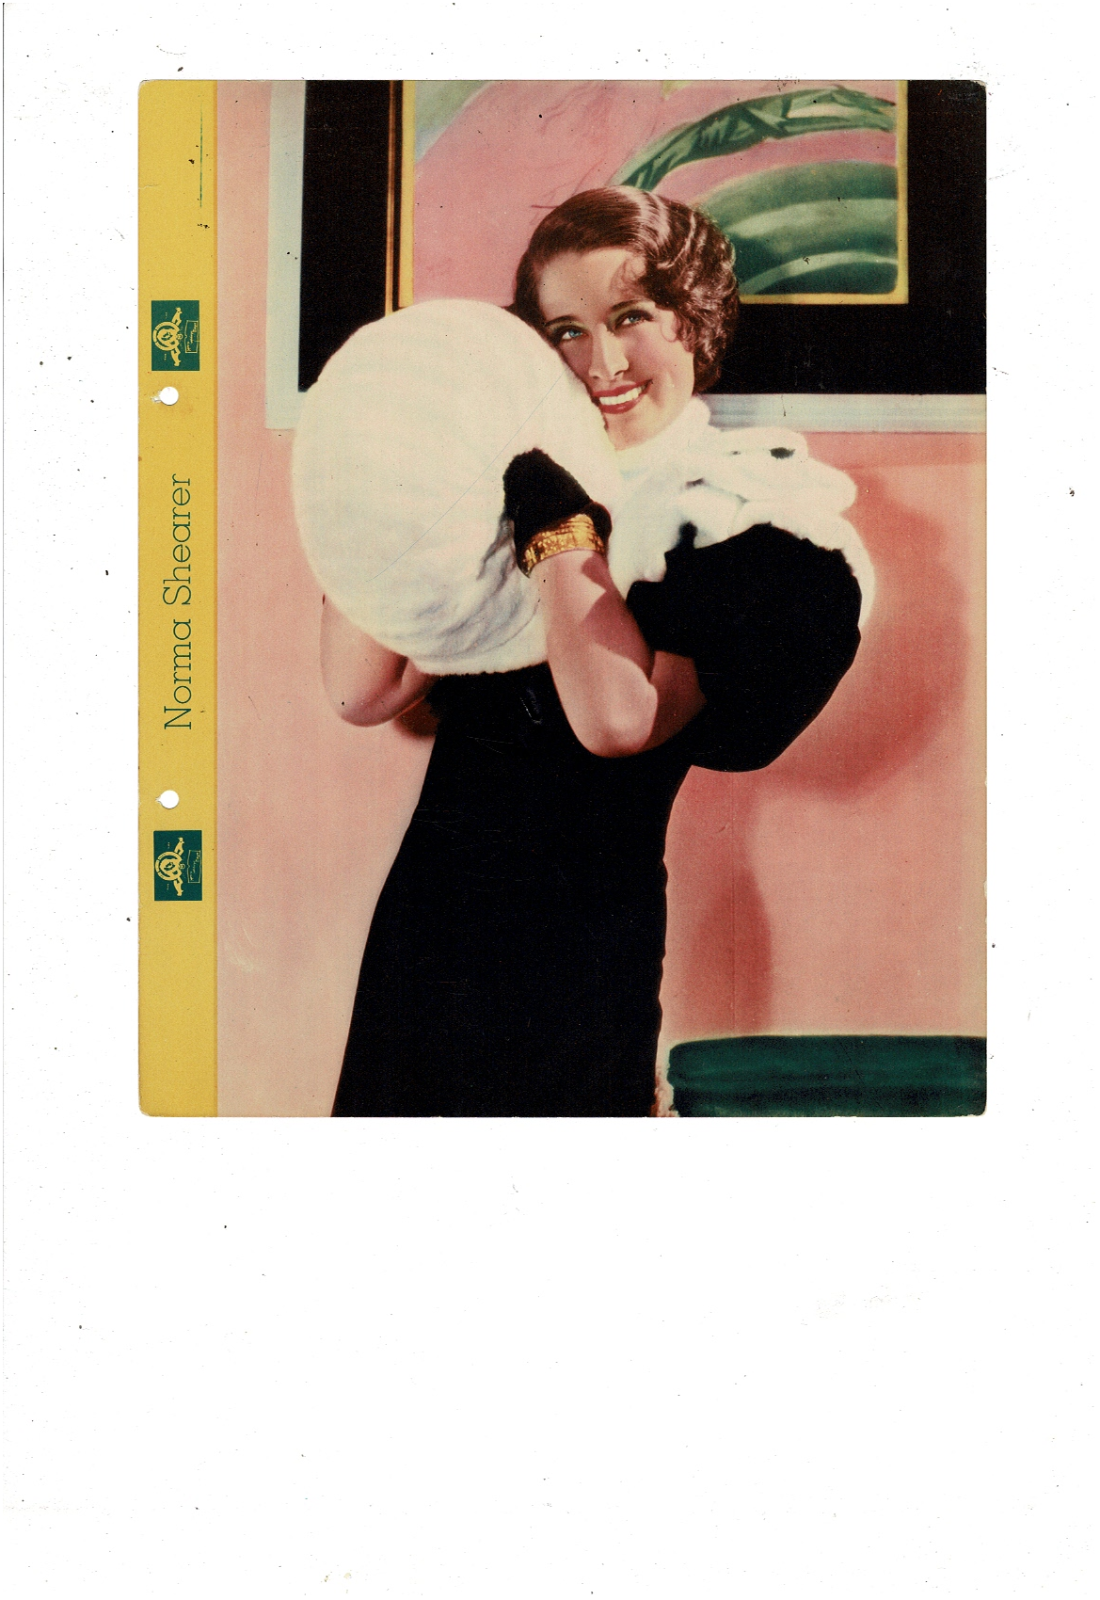 VINTAGE NORMA SHEARER PICTURE MGM STAR IN ACTION PICTURES ARTICLE AD PRINT G1000